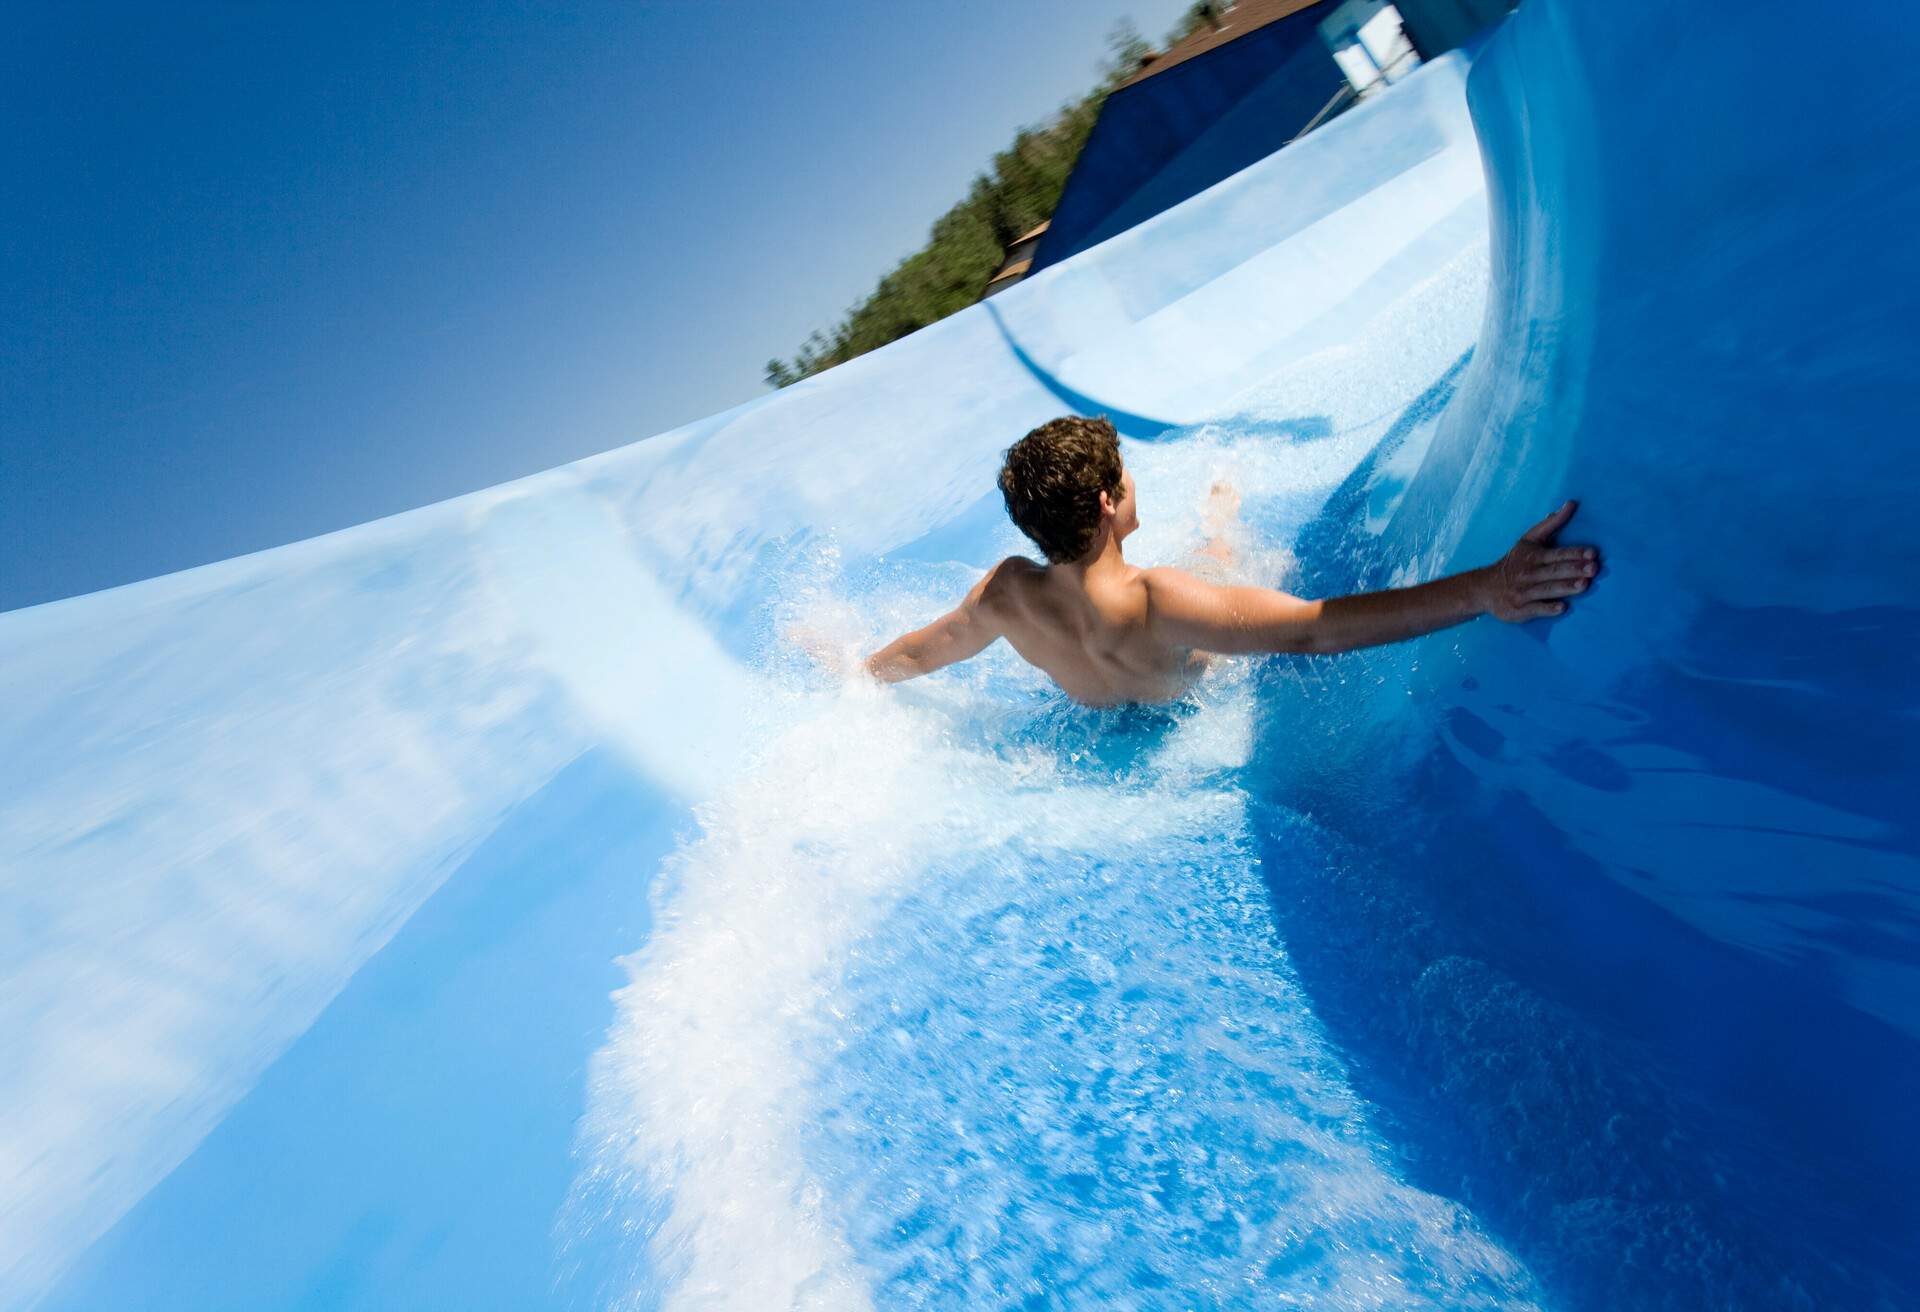 A man goes down a blue water slide.